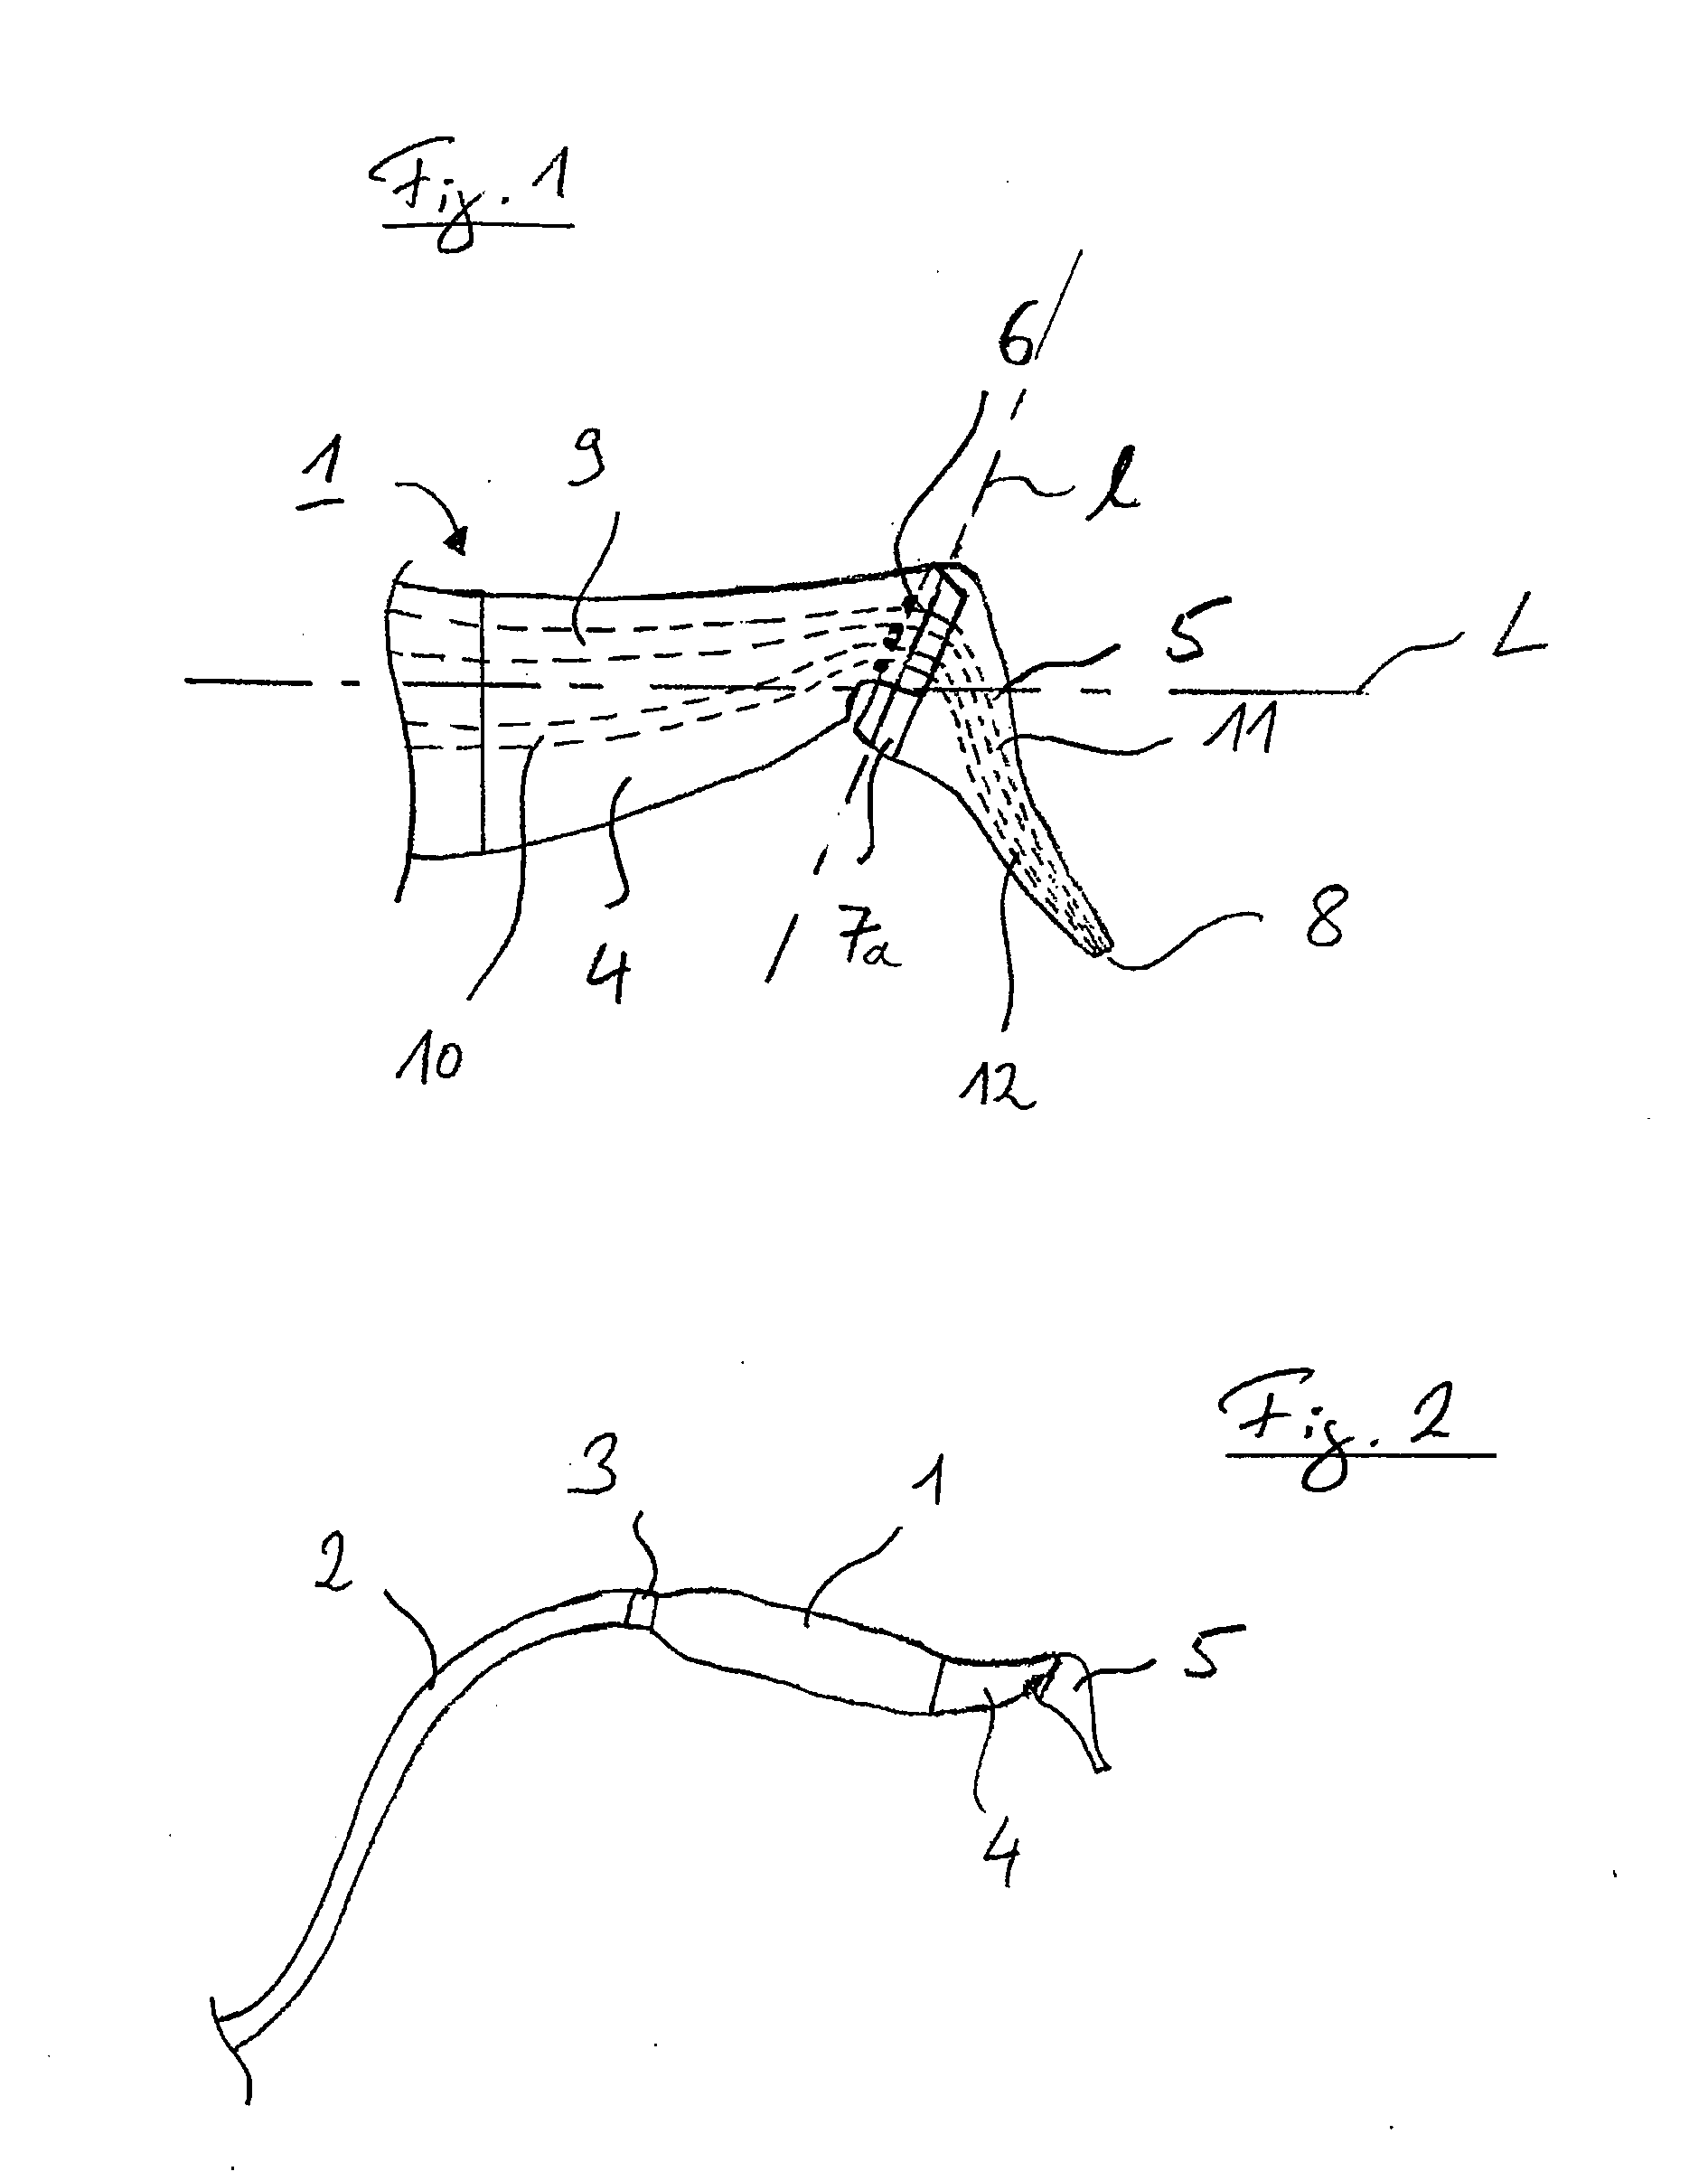 Medical handset and exchangeable nozzle for the same